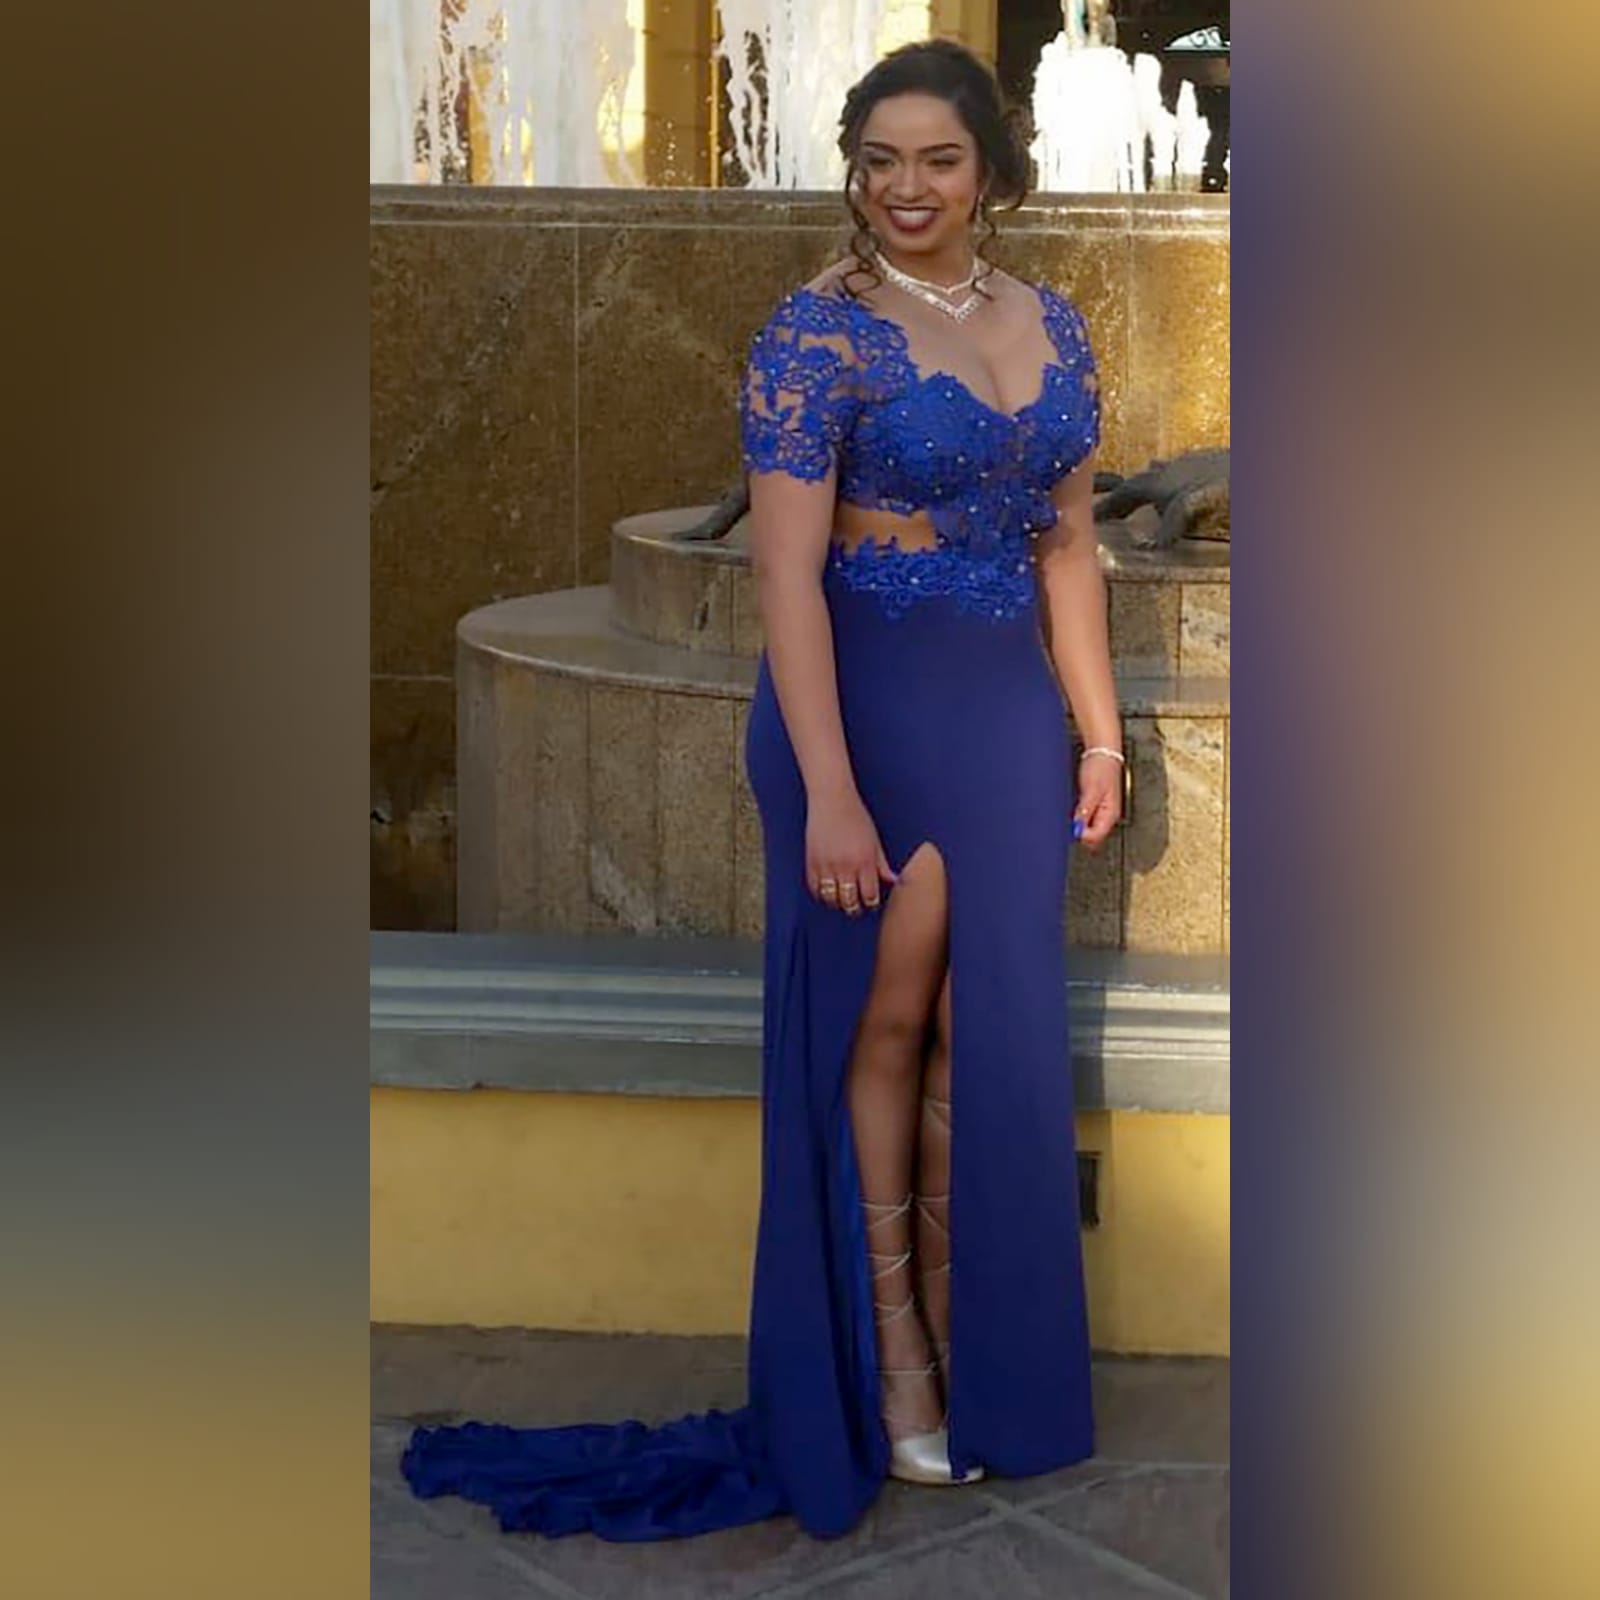 Royal blue shimmer long prom dress 7 royal blue shimmer long prom dress with a lace illusion bodice, side tummy & back opening with a sweetheart neckline. Slit and a train. Lace detailed with gold beads.